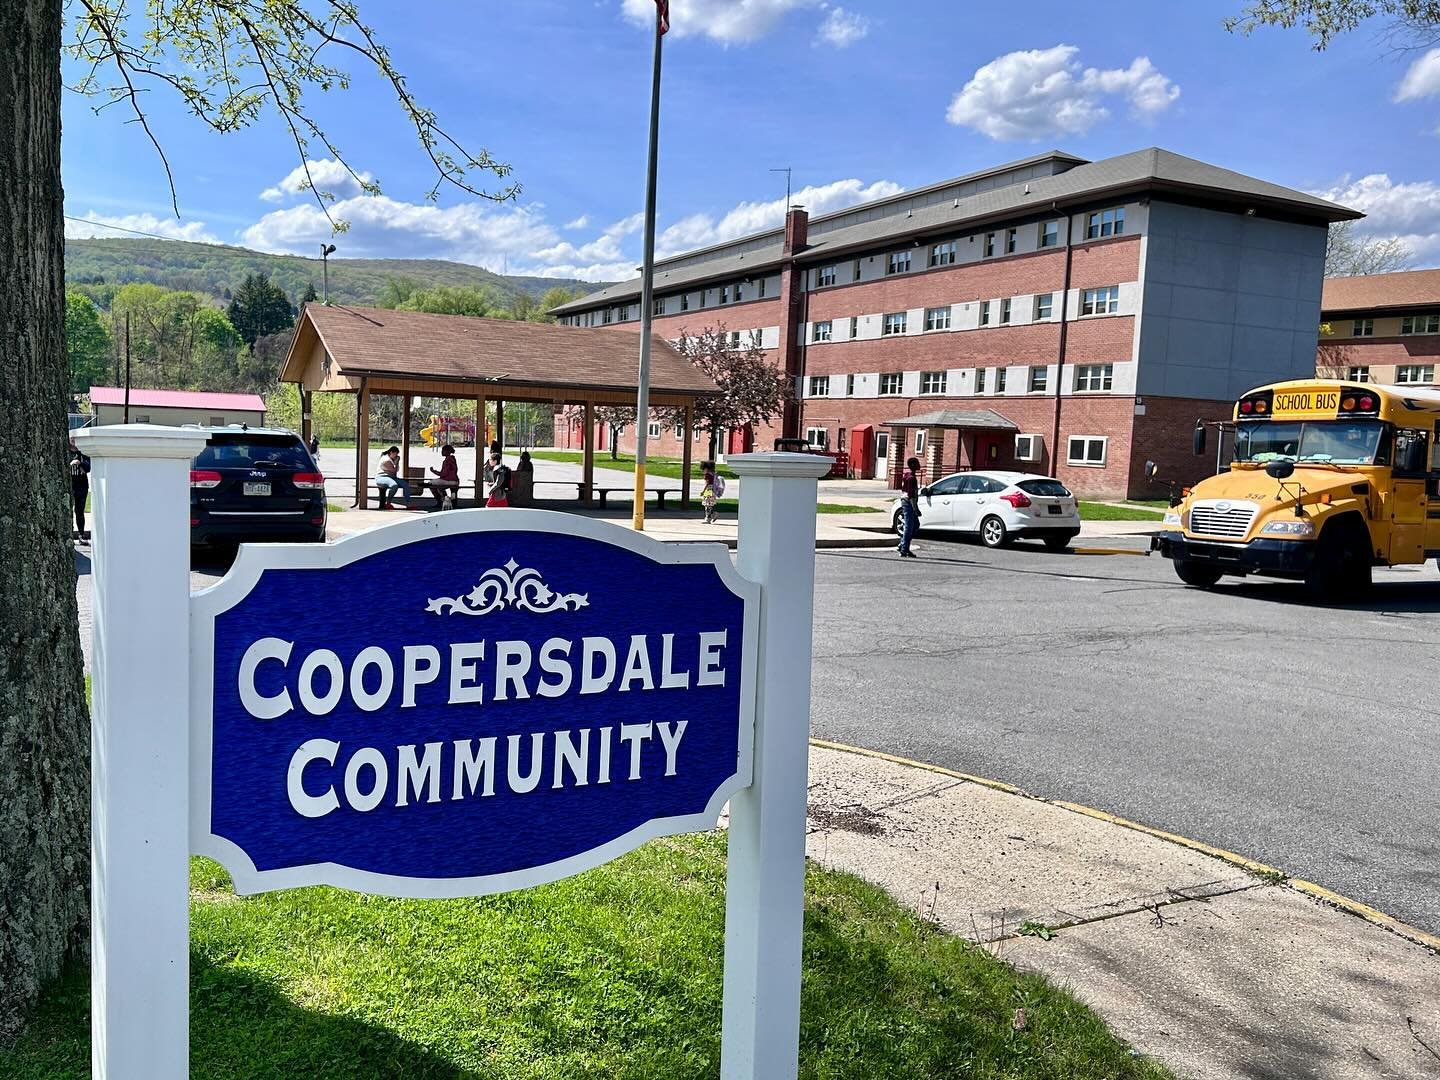 Initial site visit to the West End and Coopersdale Community in Johnstown, PA